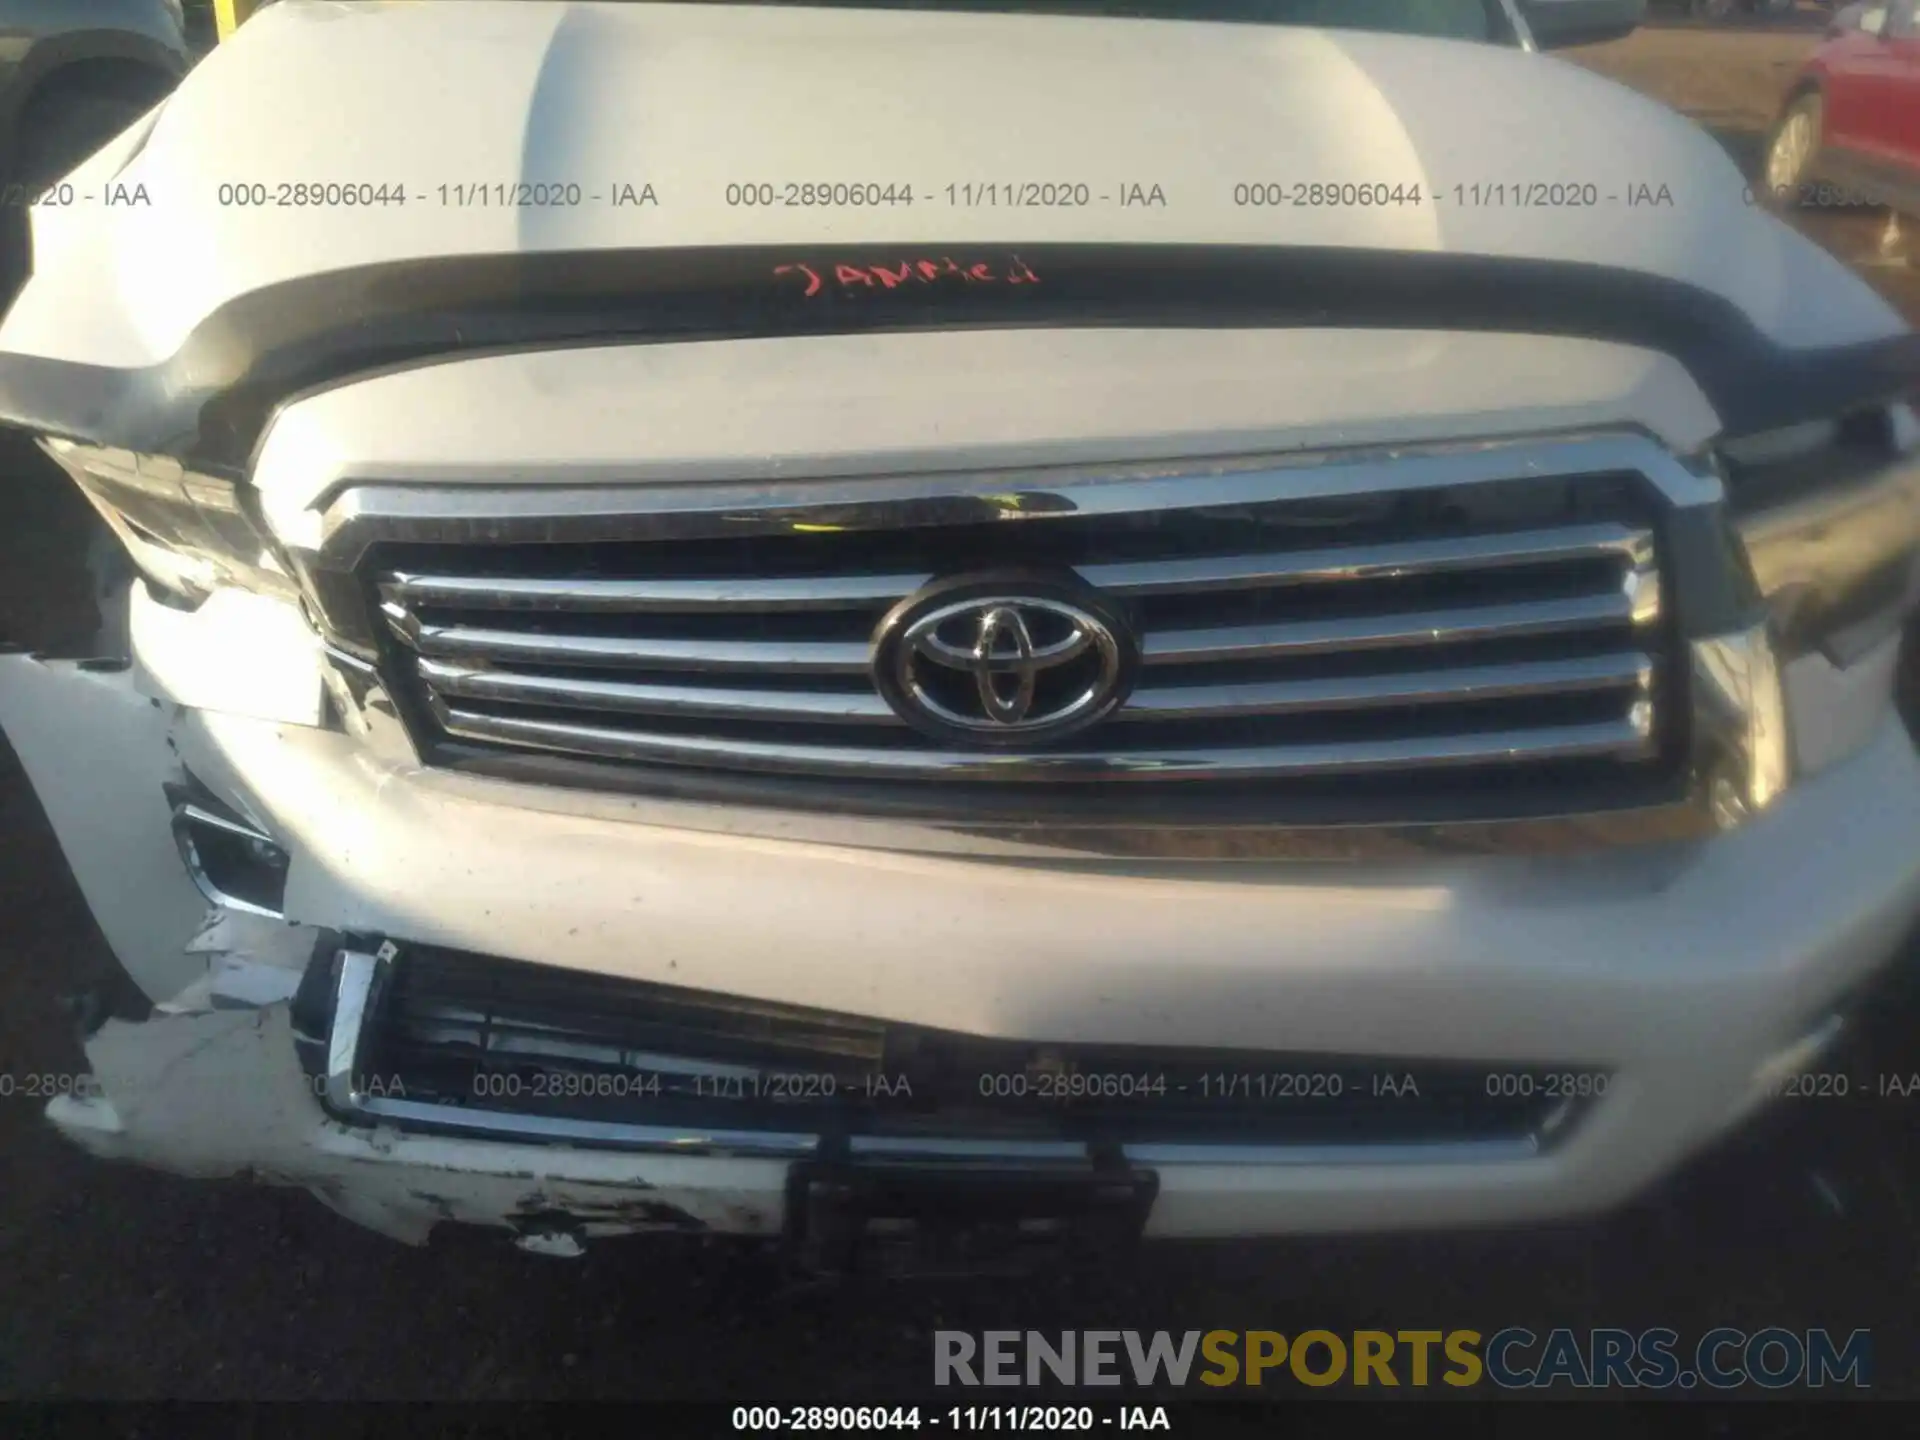 10 Photograph of a damaged car 5TDDY5G16KS165346 TOYOTA SEQUOIA 2019